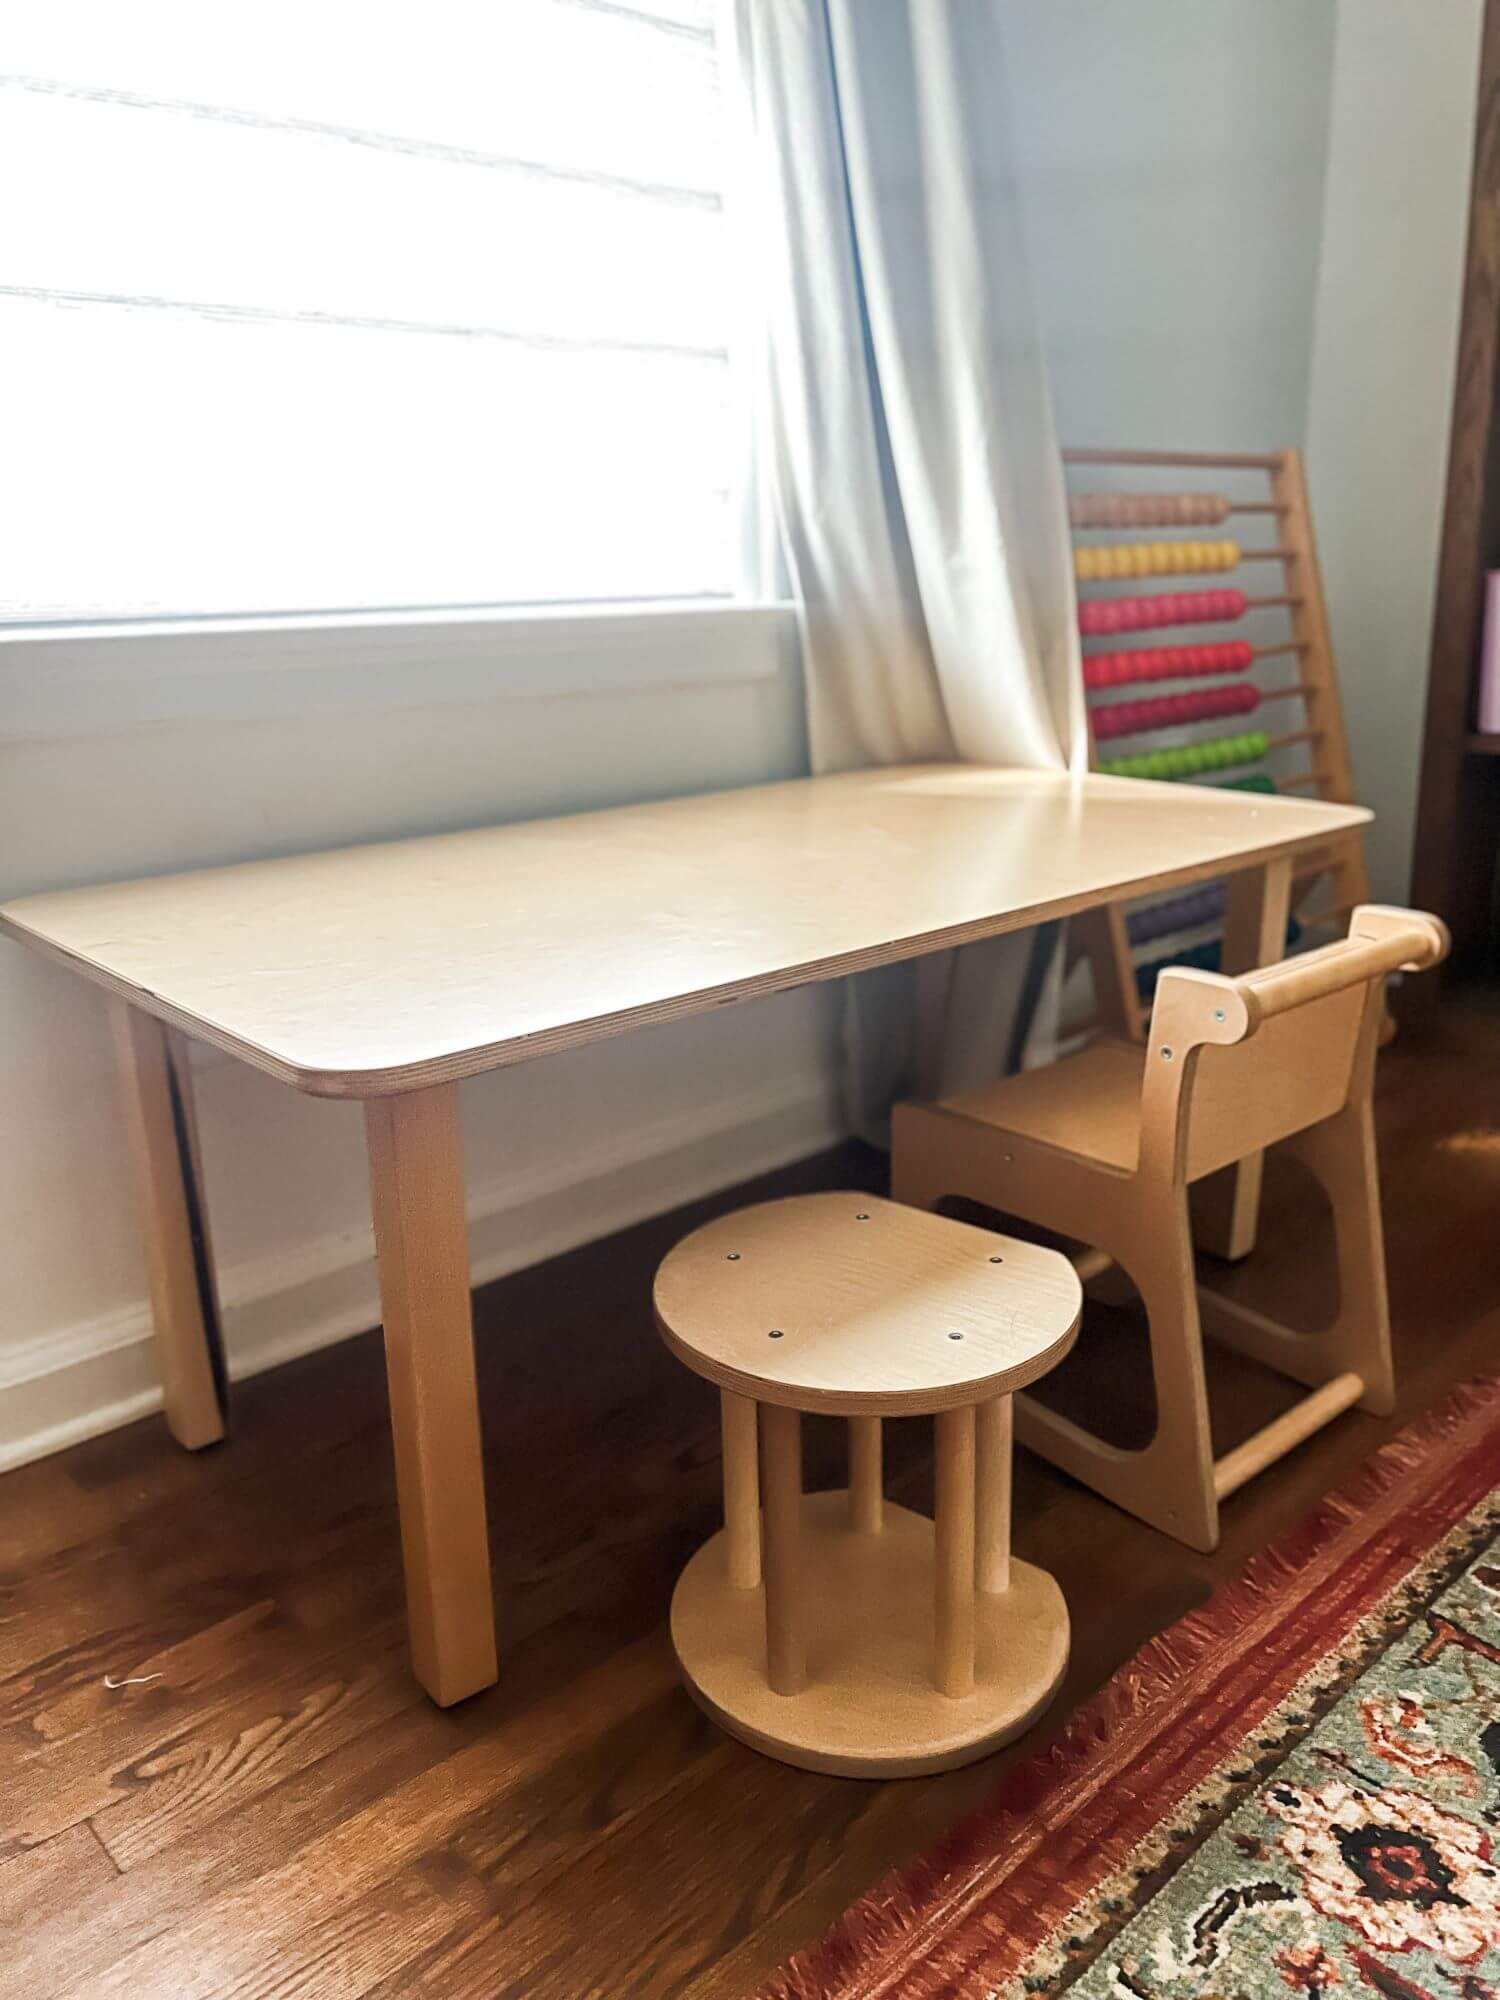 Toddler Table for Montessori homes and preschools. 3 heights